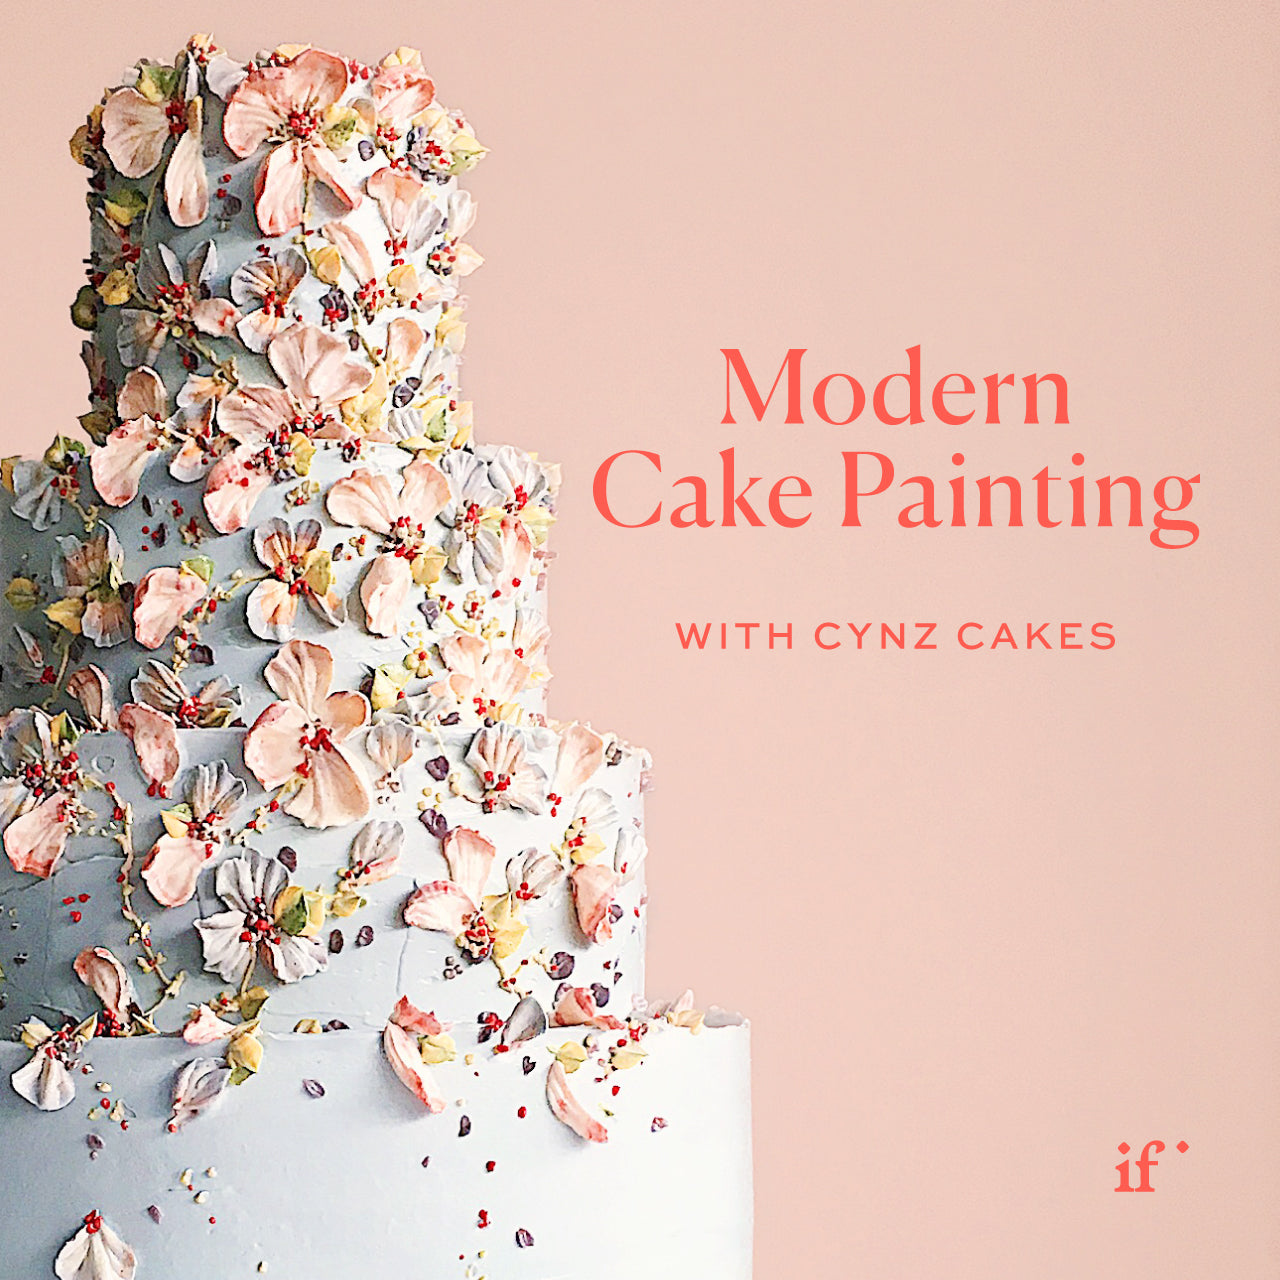 Modern Cake Painting with Cynz Cakes (EGOP21)